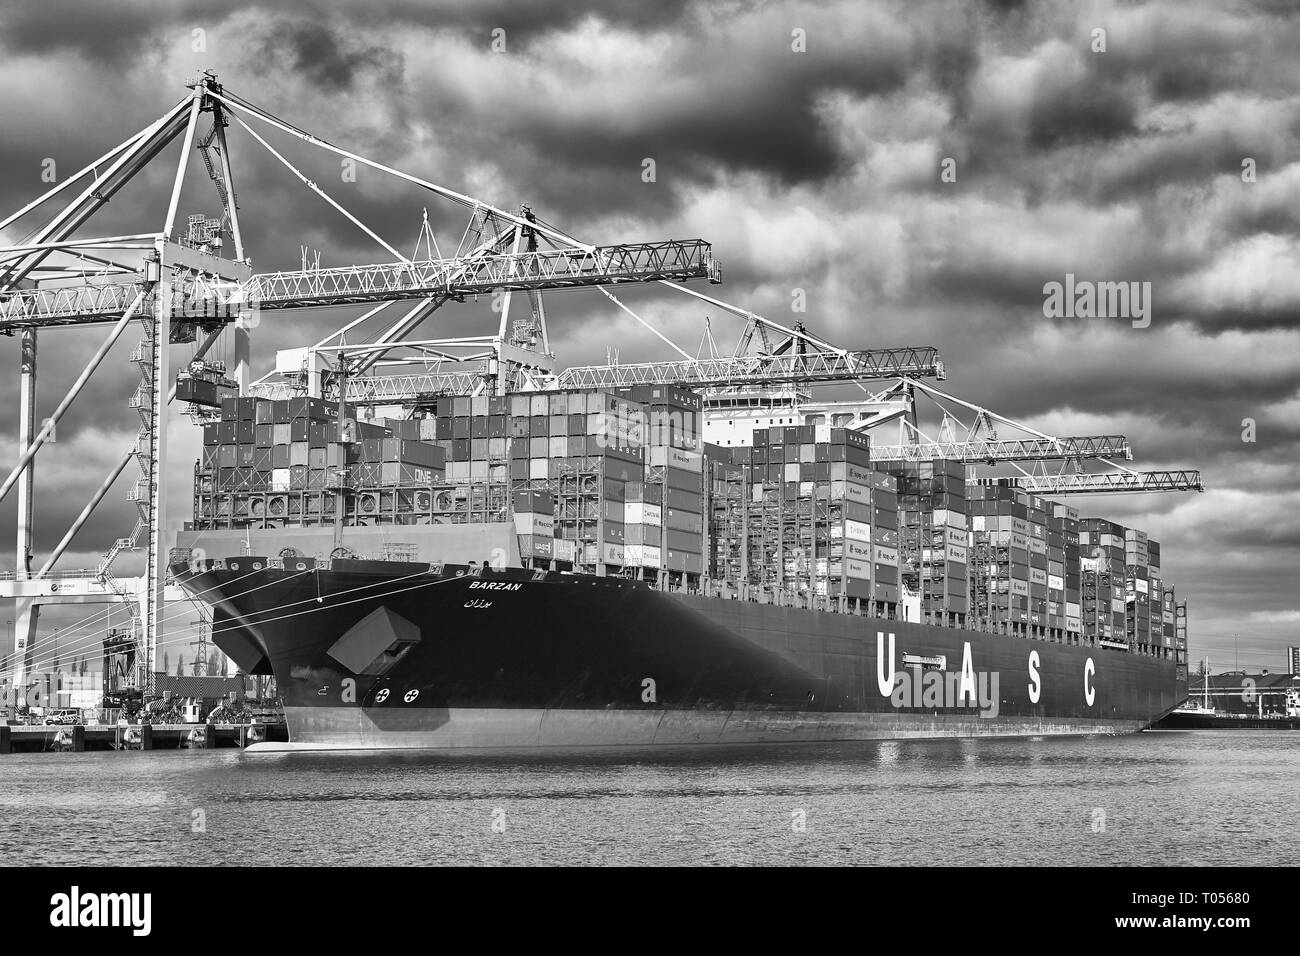 Moody Black & White Photo Of The Ultra-Large, 400 Metre, UASC Container Ship, BARZAN, Loading And Unloading In The Southampton Container Terminal Stock Photo